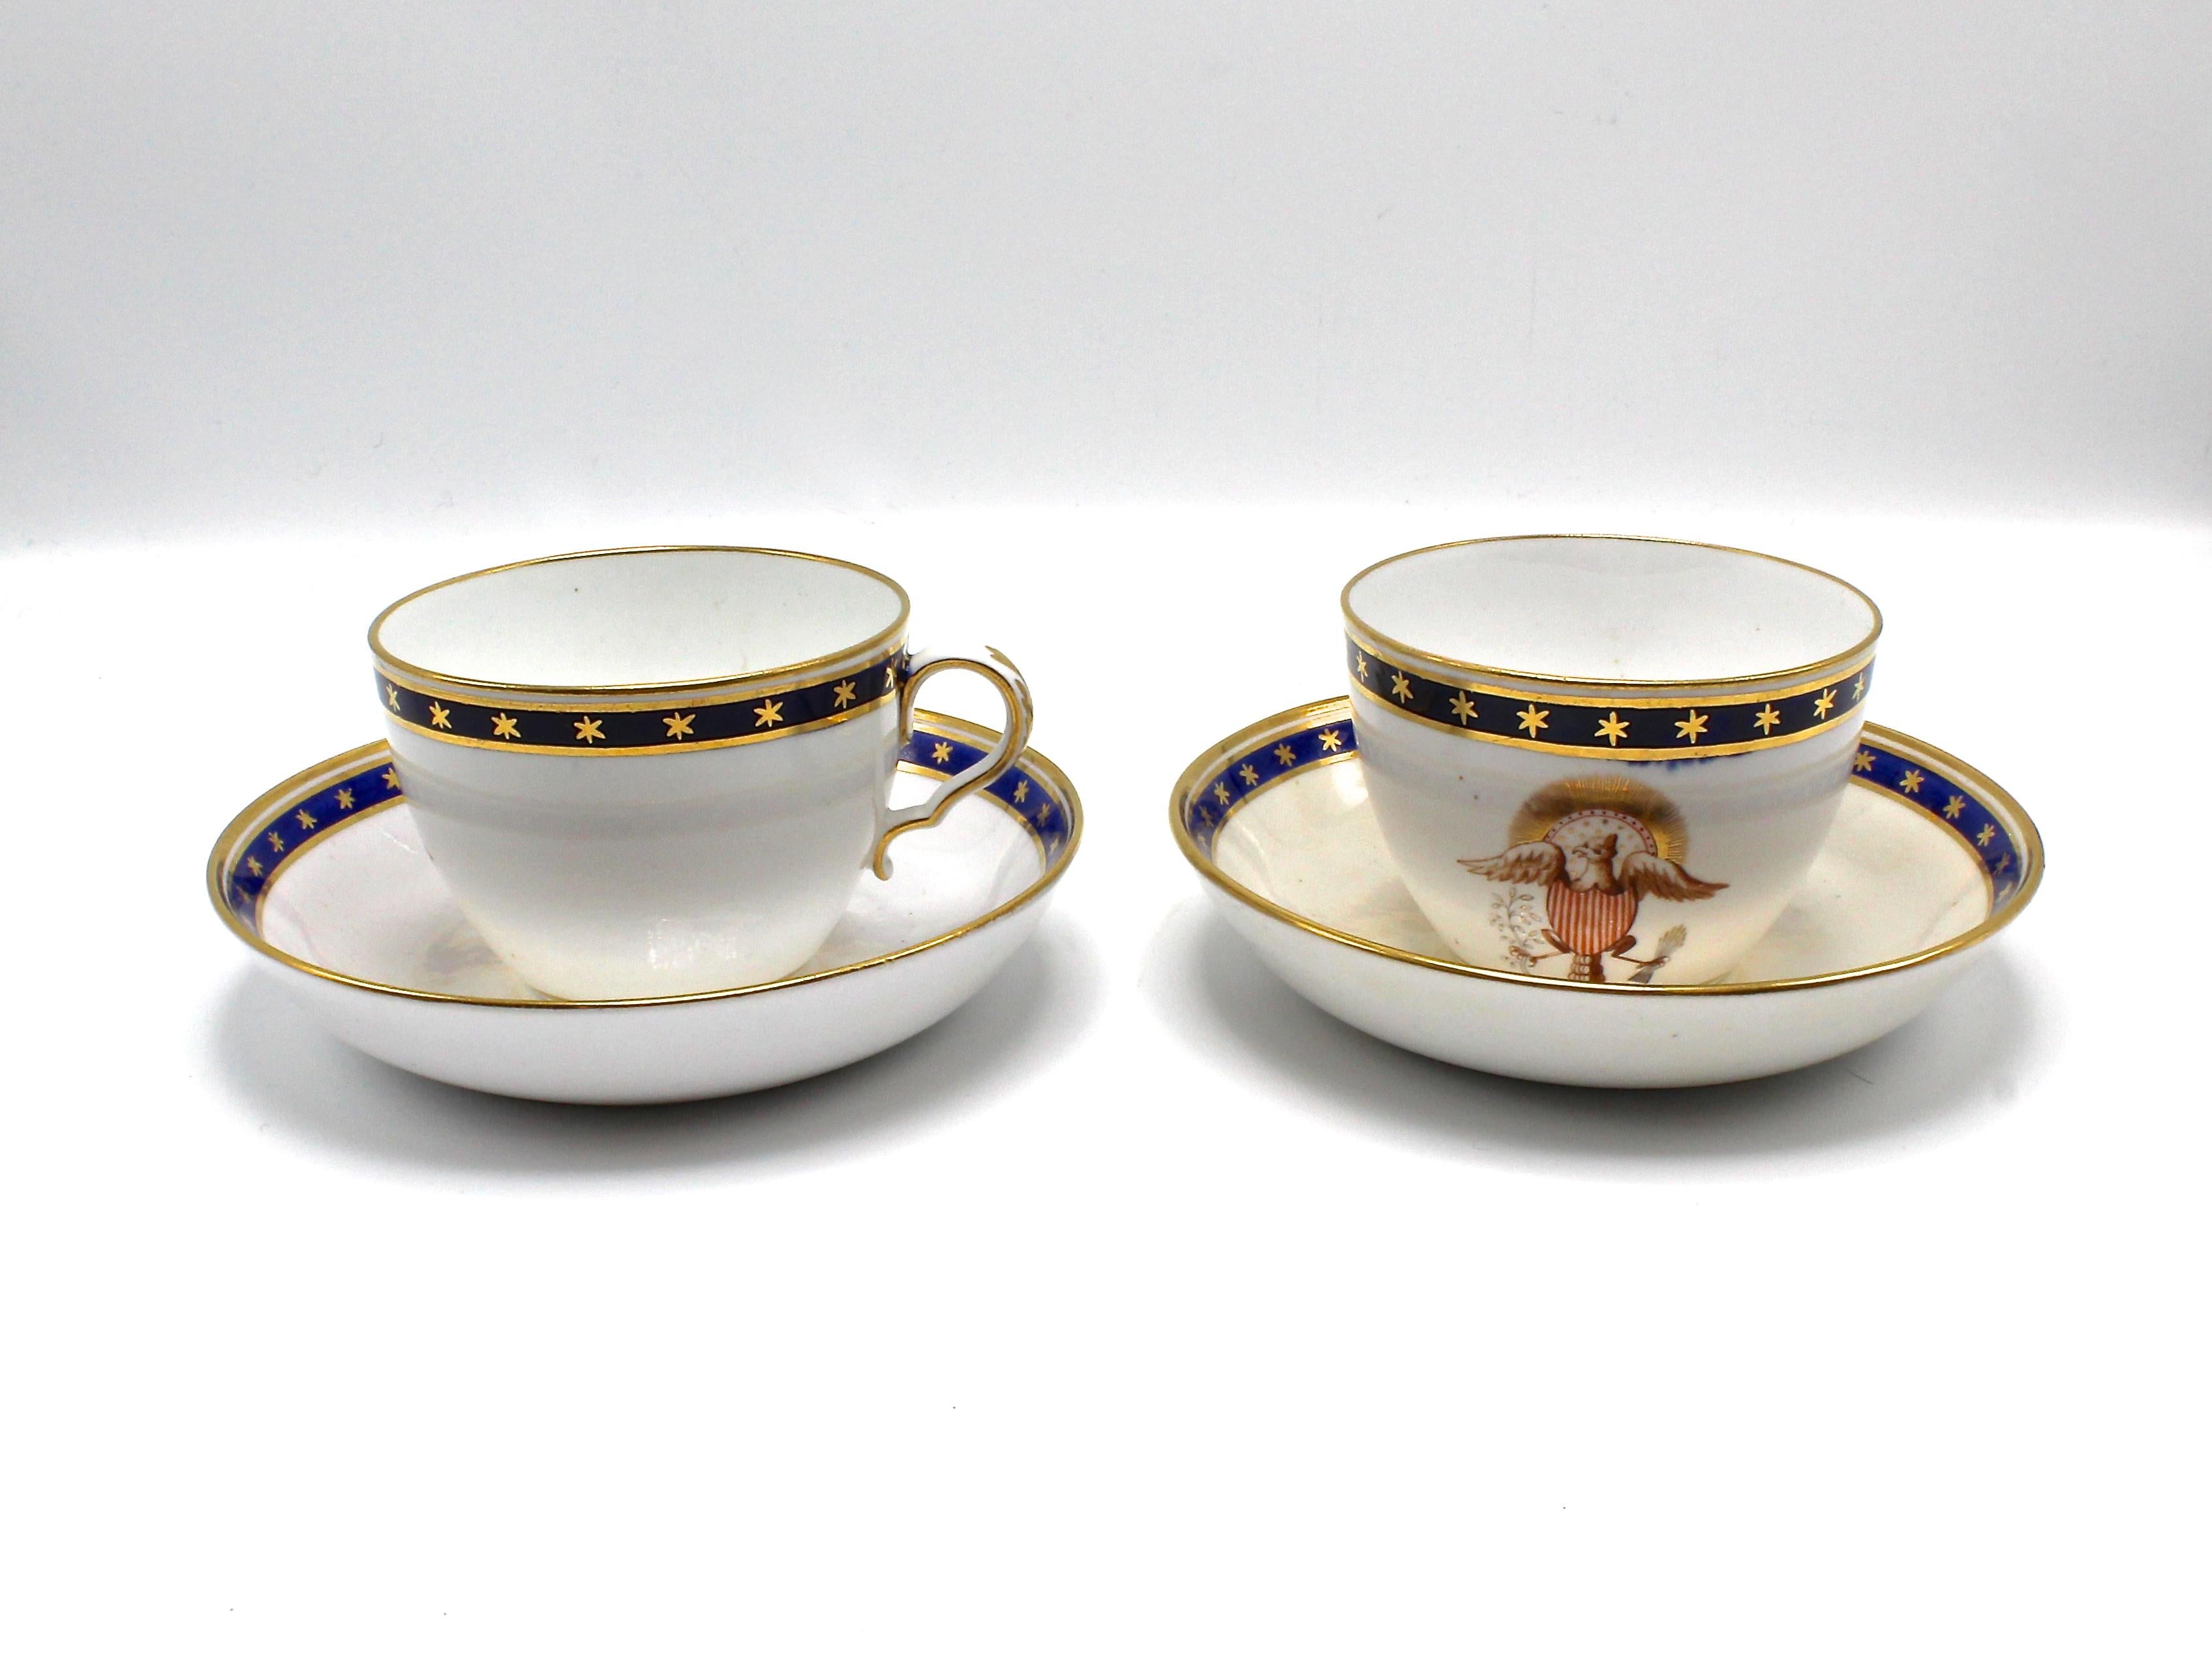 This is a beautifully matched pair of patriotic American eagle teacups and saucers from the 1840s. They are made of bone china with a thick cobalt blue top border design with gold stars, gold outer pinstripes, and a gold top rim edge. They feature a